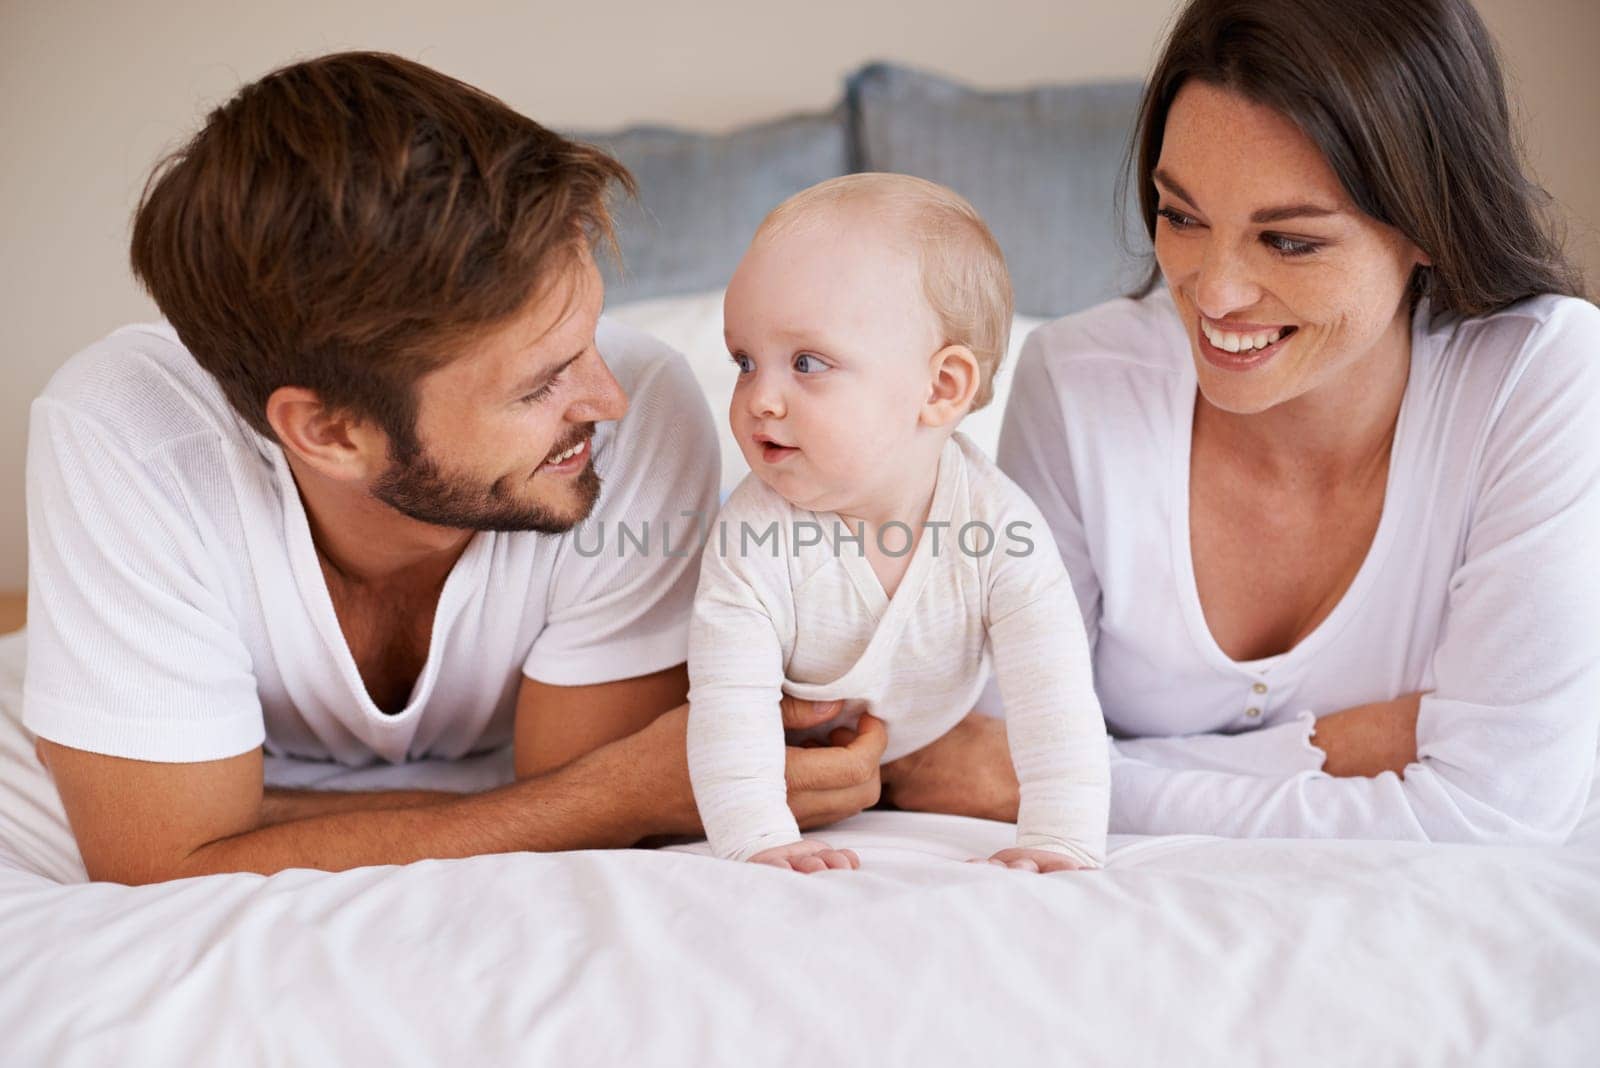 Happy family, dad and mom with baby on bed for love, care and quality time together at home. Mother, father and cute newborn child relaxing in bedroom for happiness, support and development of kids.